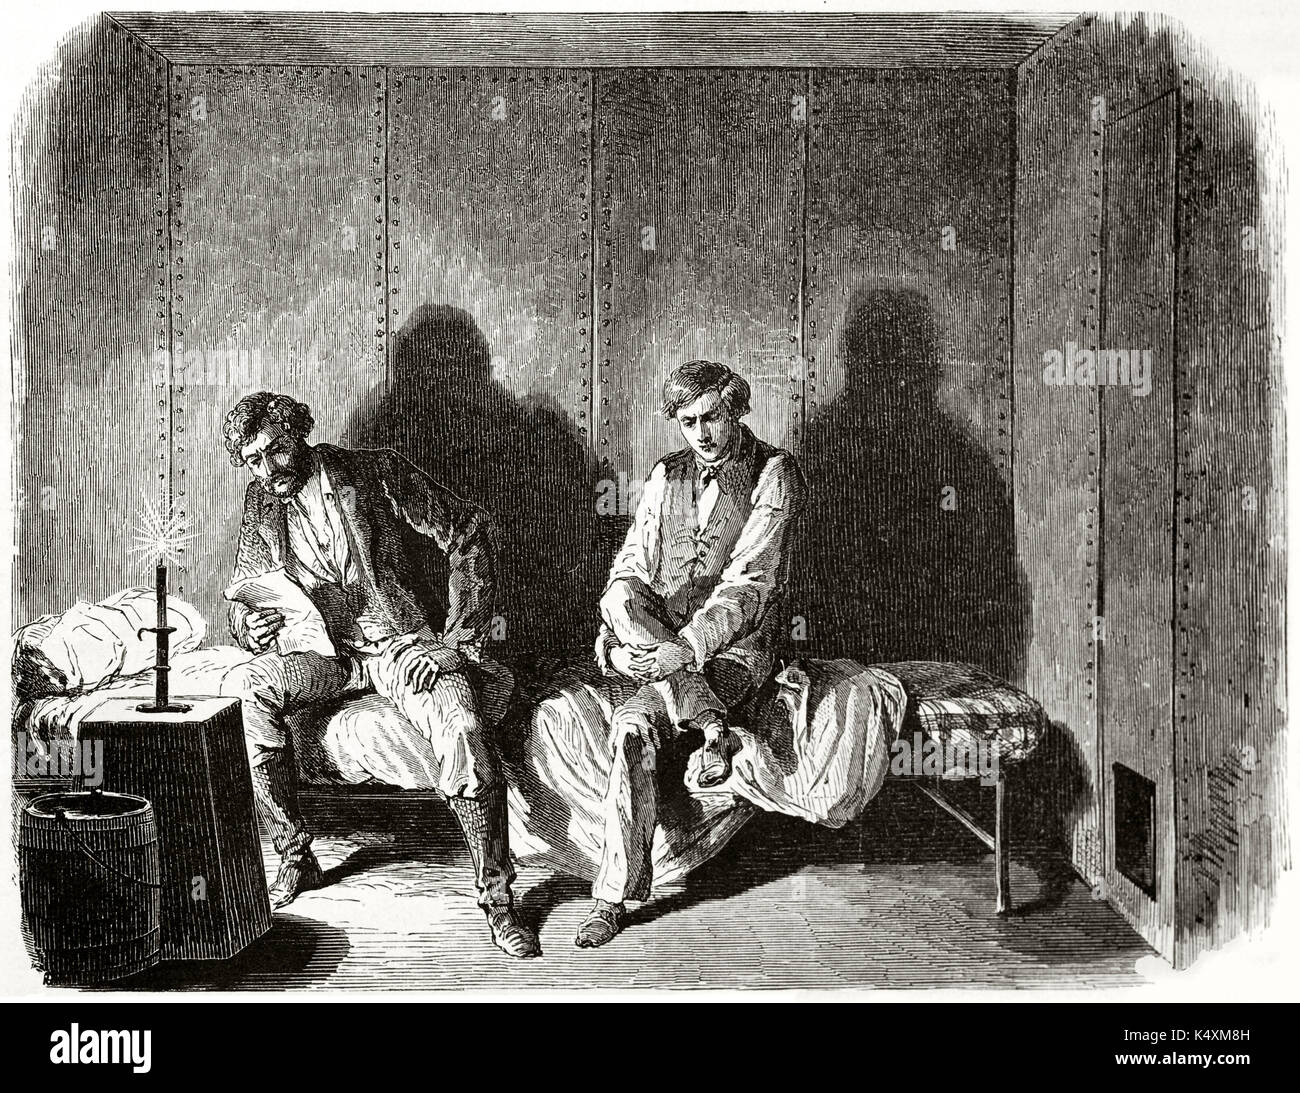 Two ancient people elegant dressed jailed in a dark, claustrophobic prison cell. John Doy and his son Charles imprisoned. By Janet-Lange published on Le Tour du Monde Paris 1862 Stock Photo